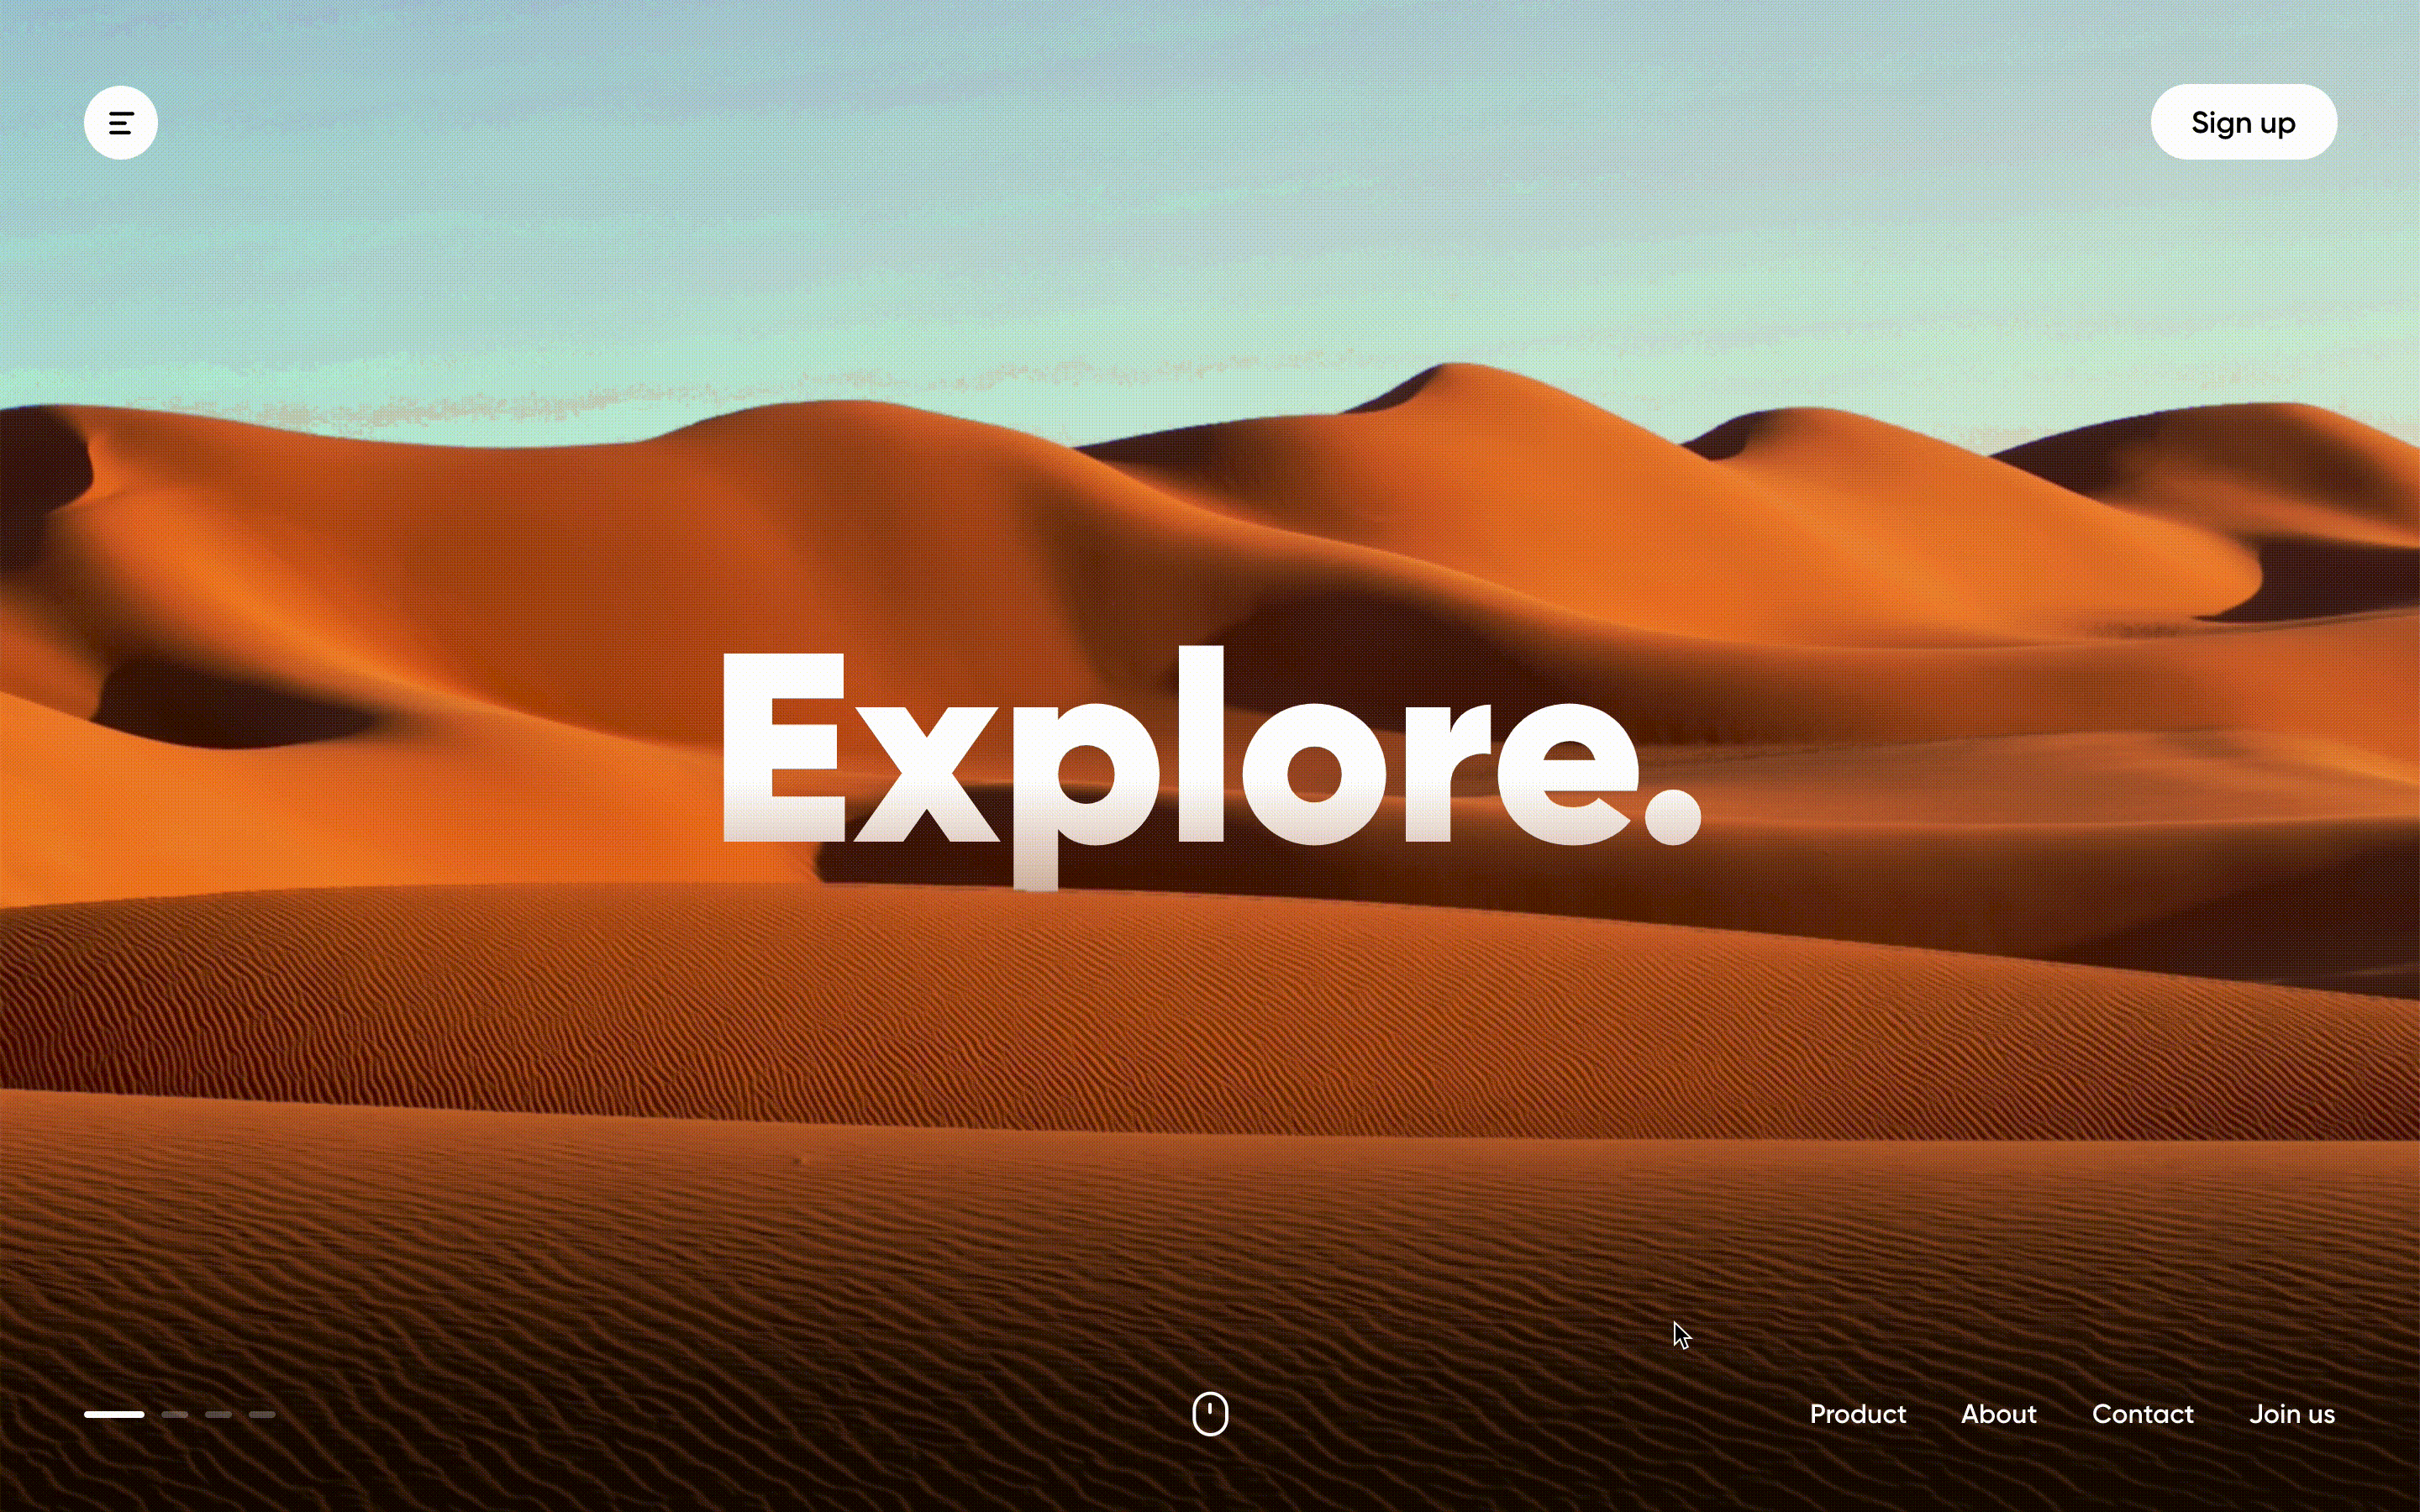 Parallax scrolling prototype made by ProtoPie